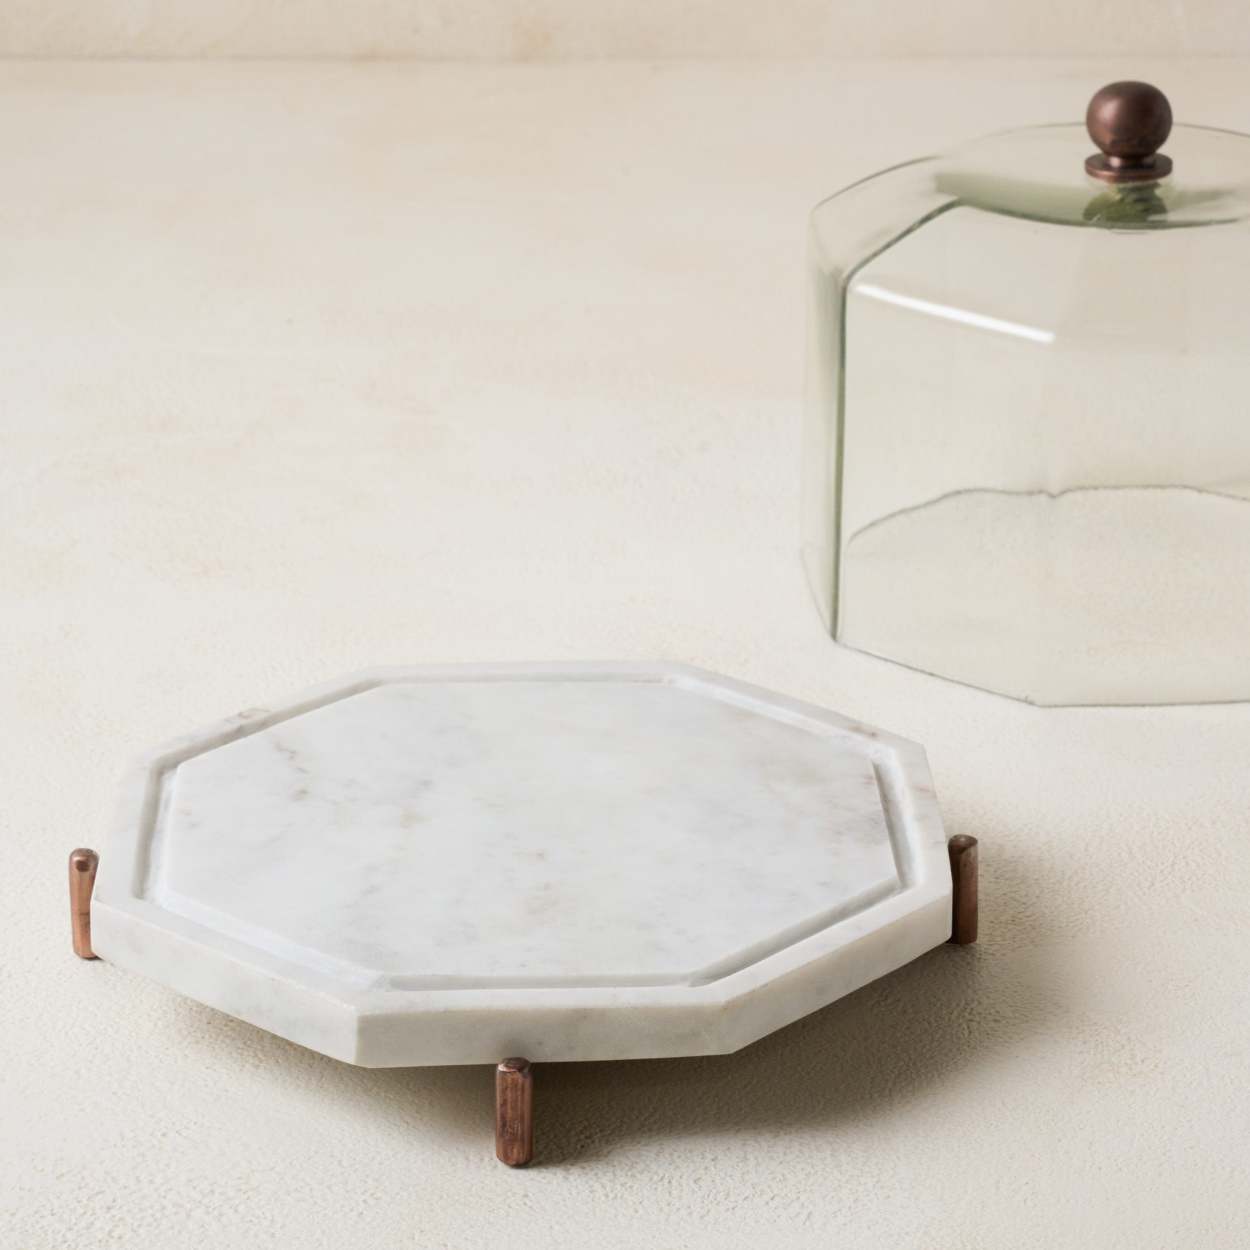 Marble and Copper Cake Stand - Magnolia